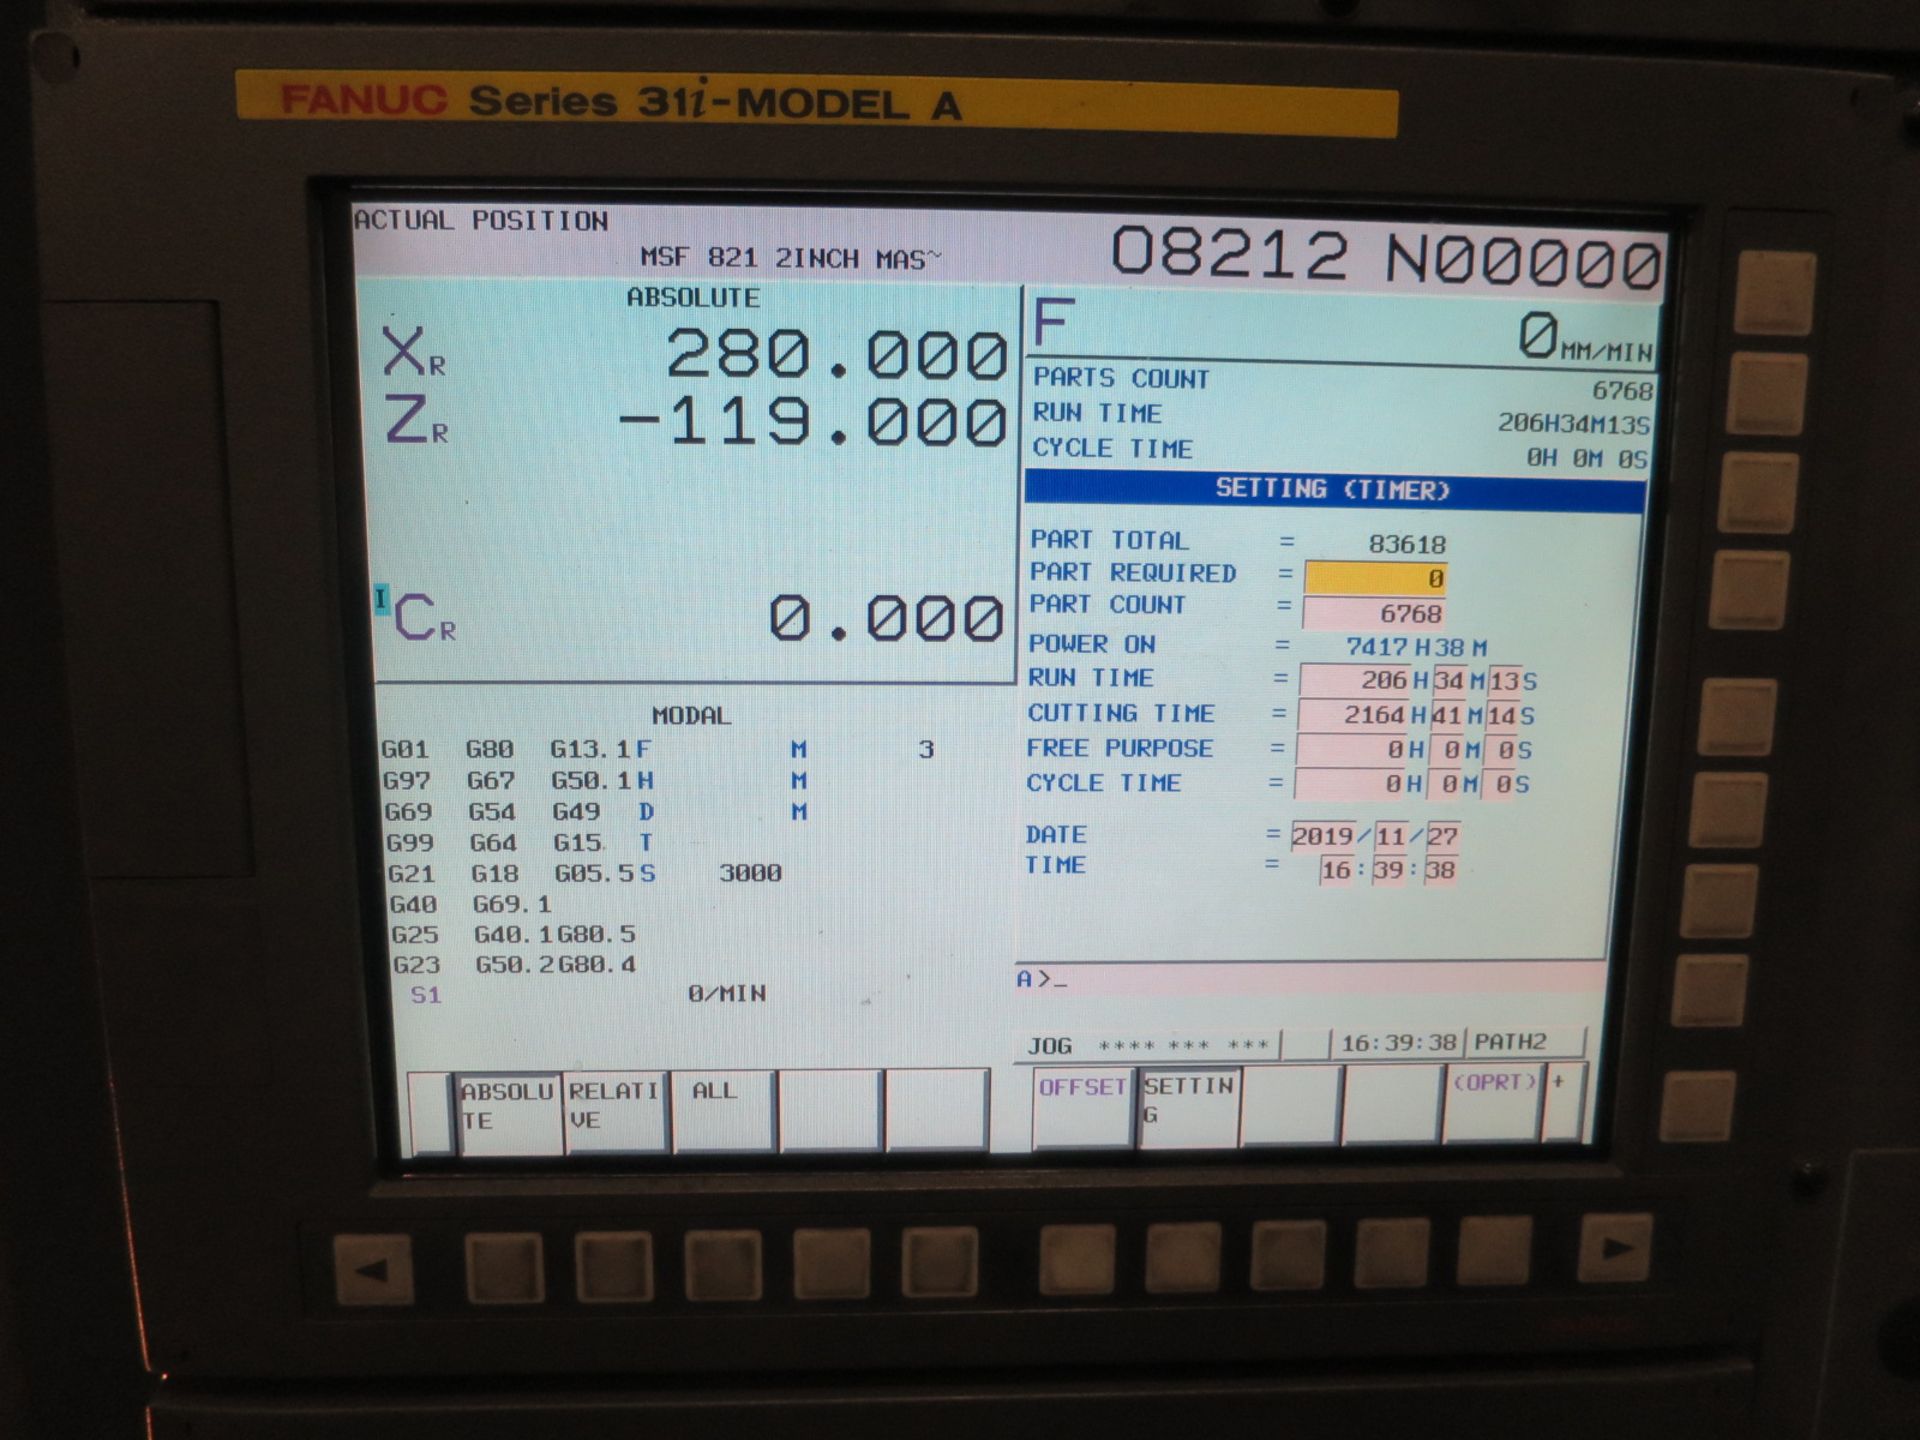 Okuma 2SP-150HM Twin Spindle 3-Axis Turning Center w/Live Milling, S/N 2SP-150HM, New 2011 - Image 7 of 12